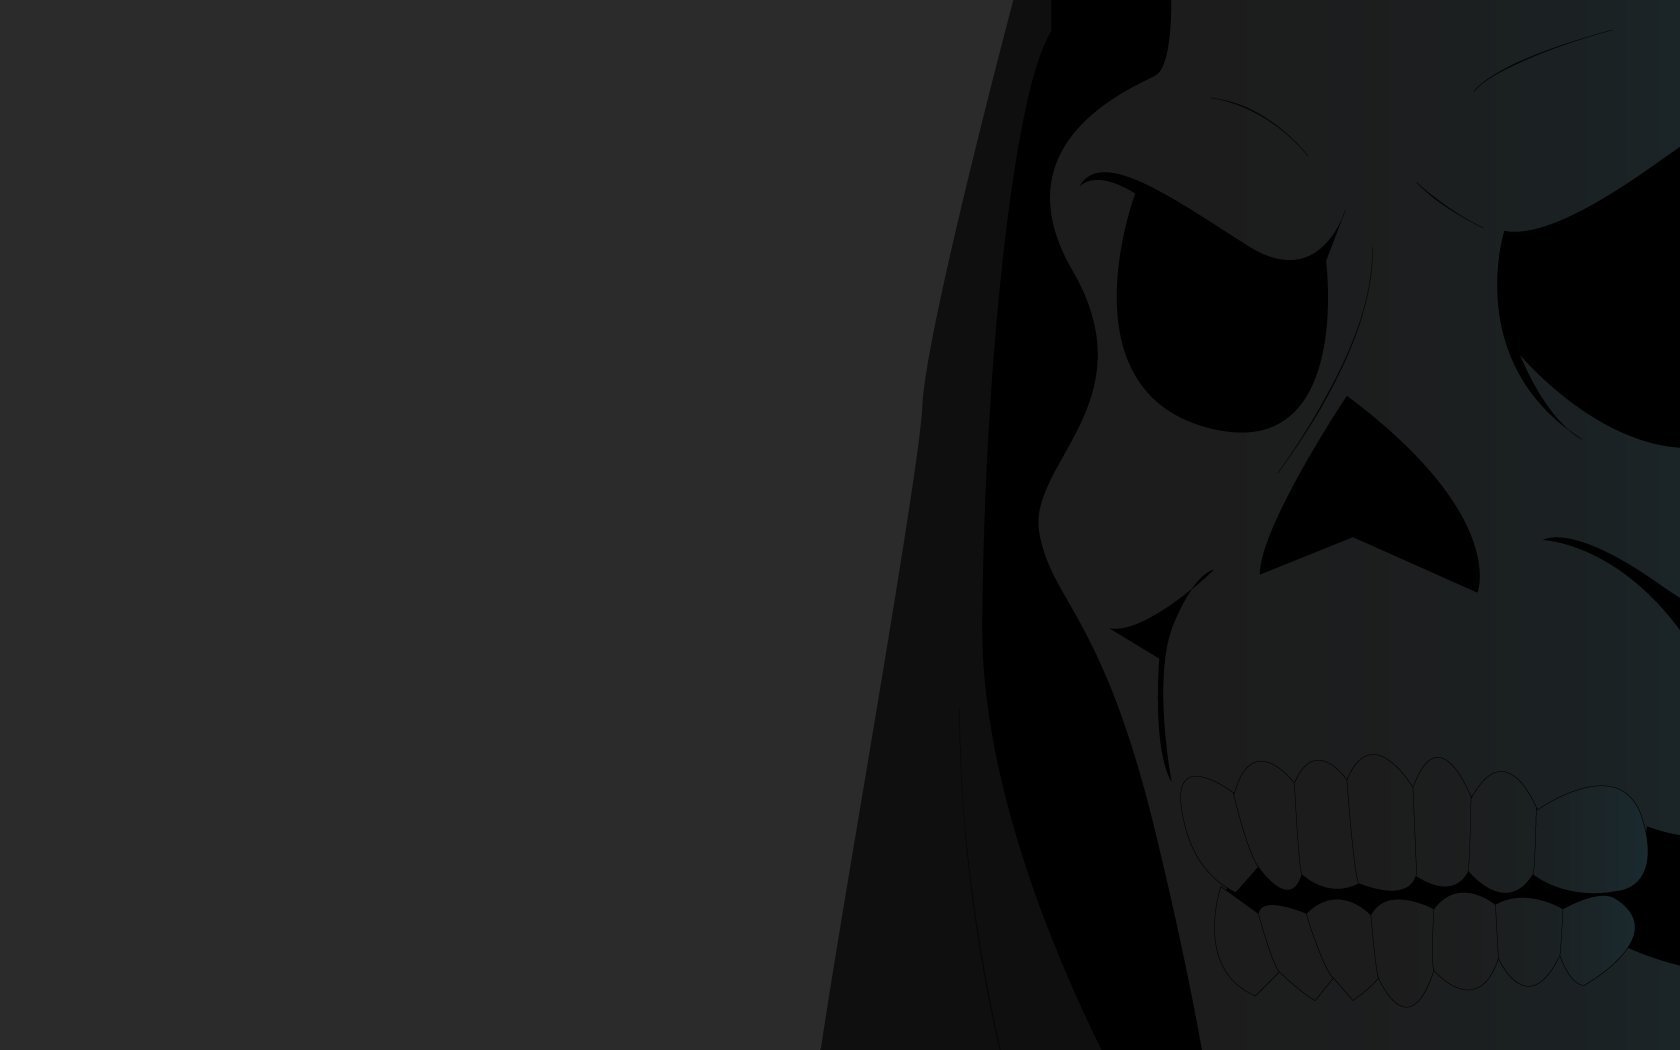 He Man Image Skeletor HD Wallpaper And Background Photos